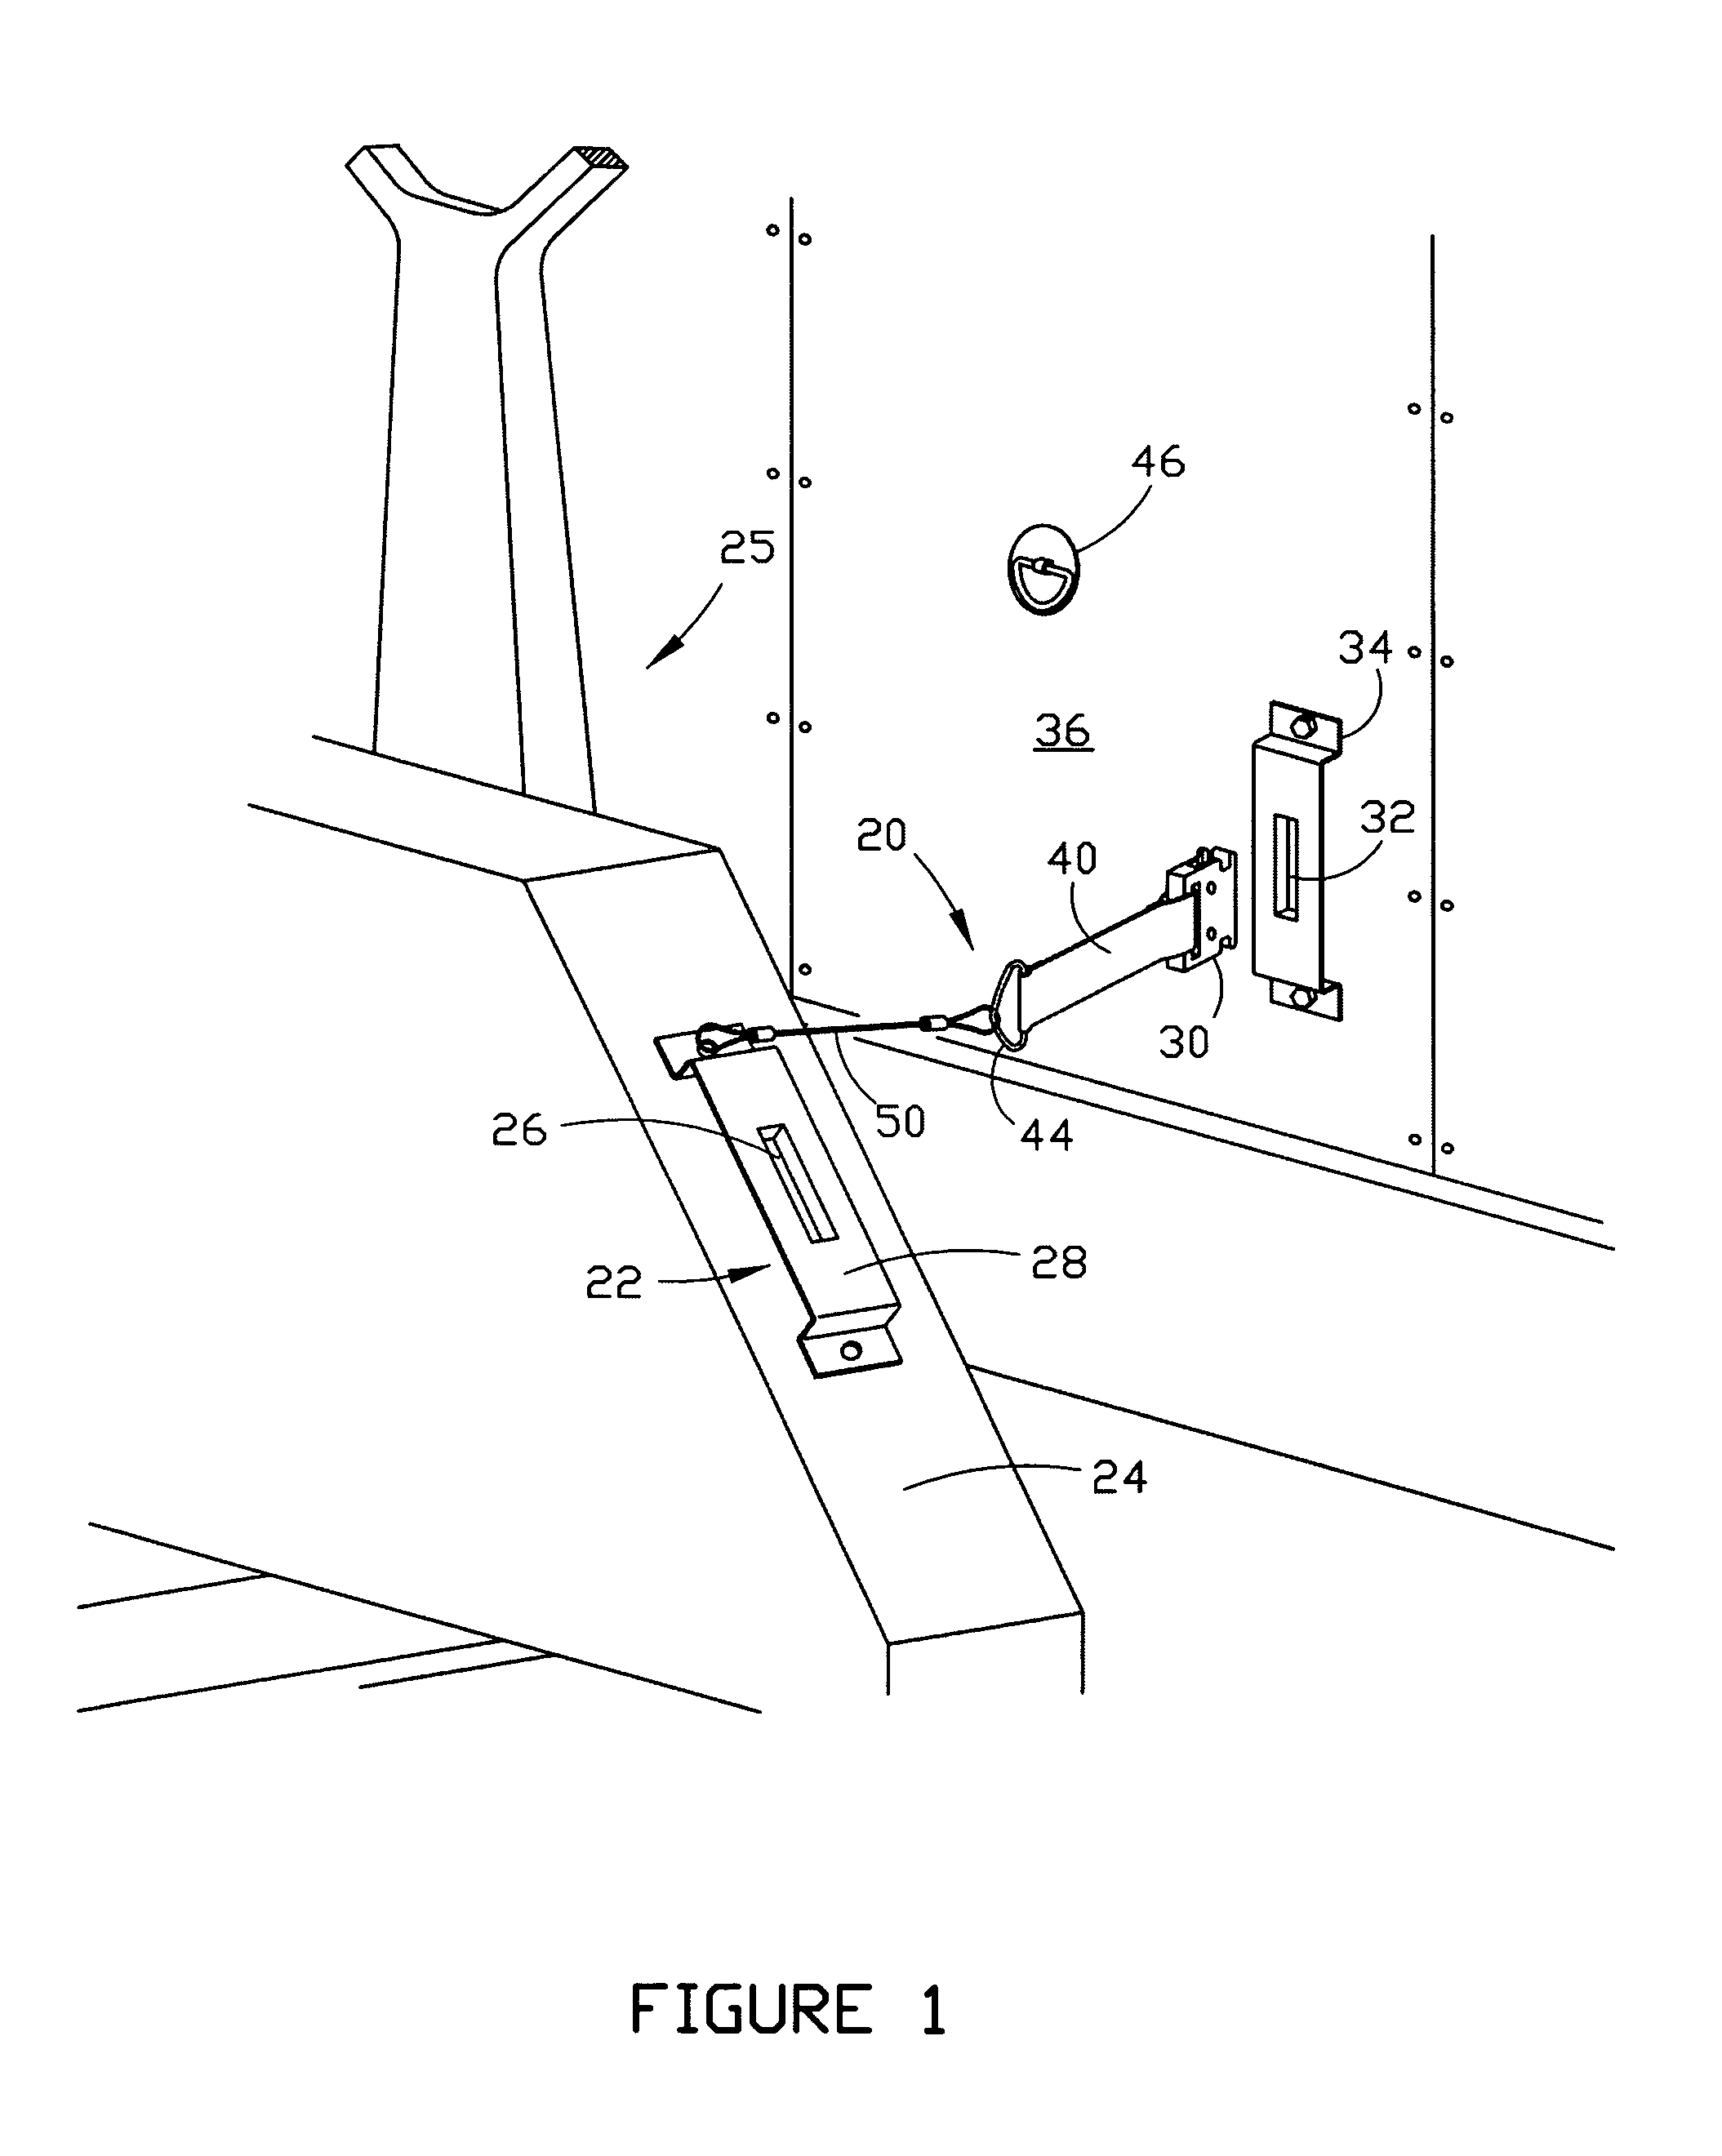 Apparatus and method for securing a pallet jack